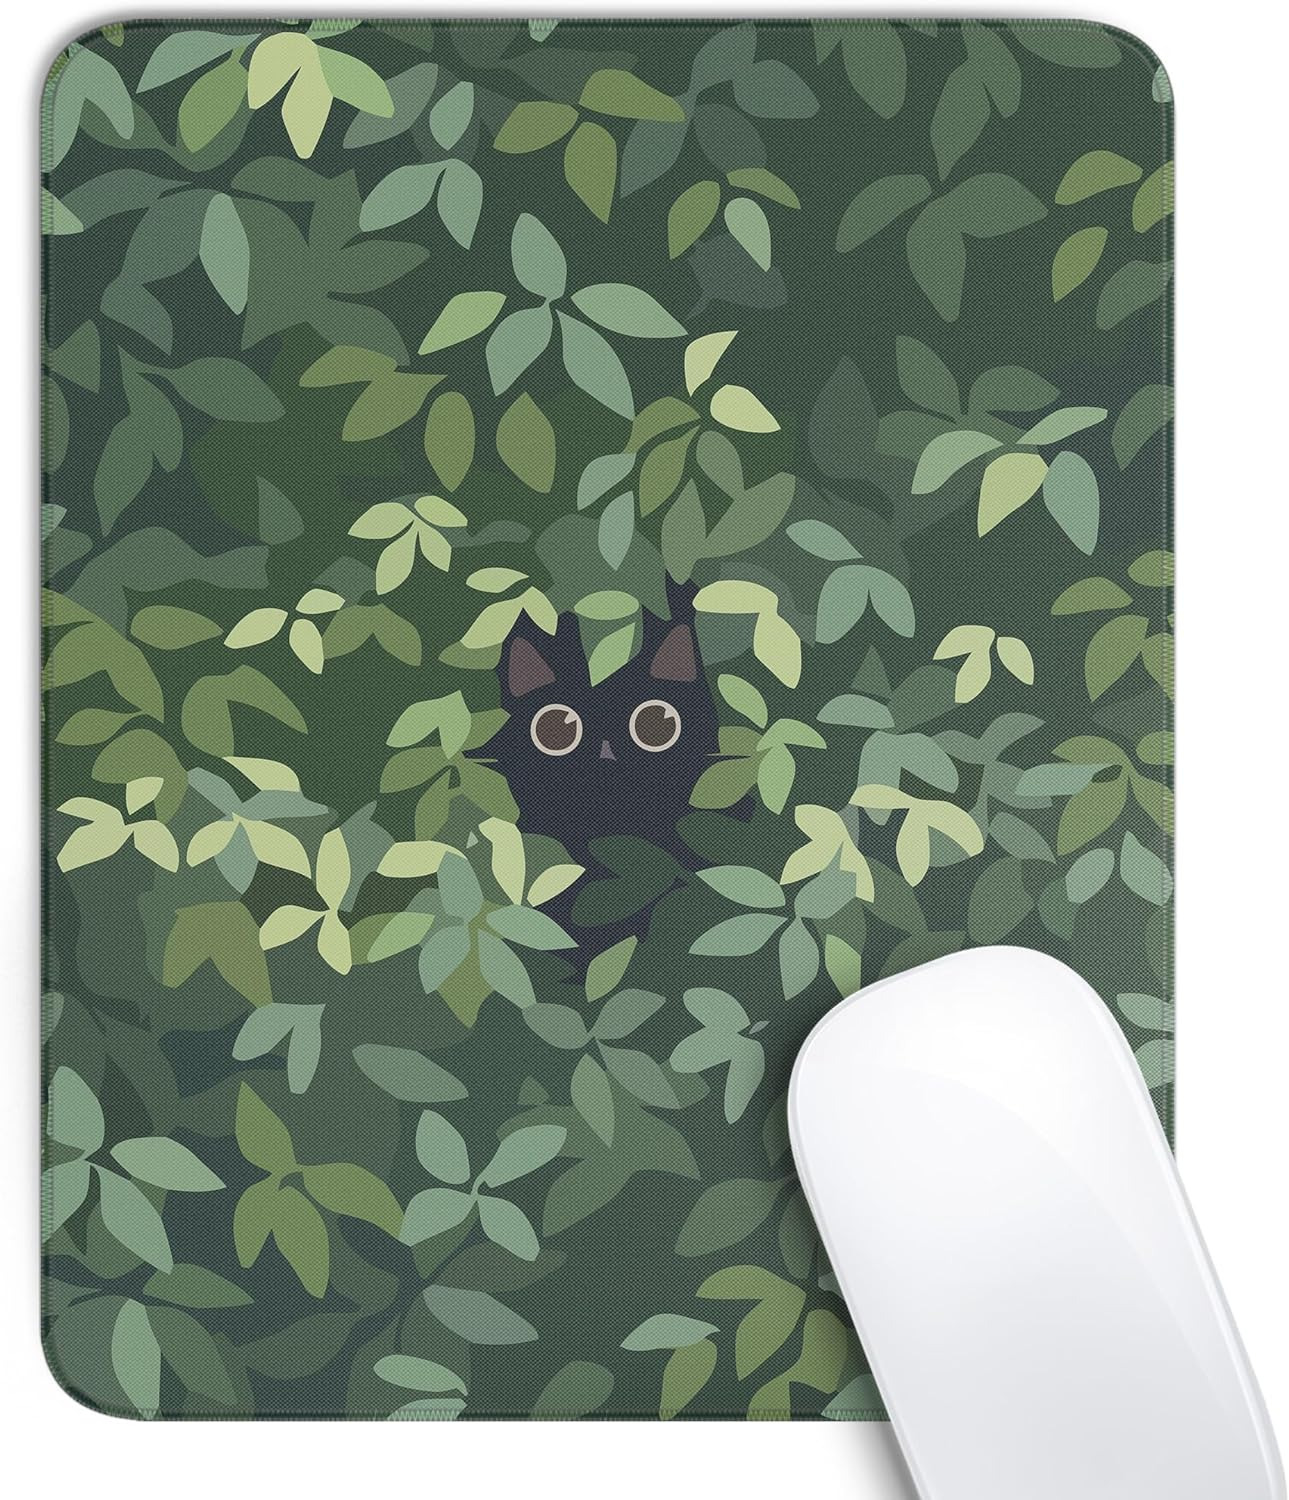 Anime Black Cat Square Mouse Pad,Cute Cat Mouse Pads for Wireless Mouse Desk Acc